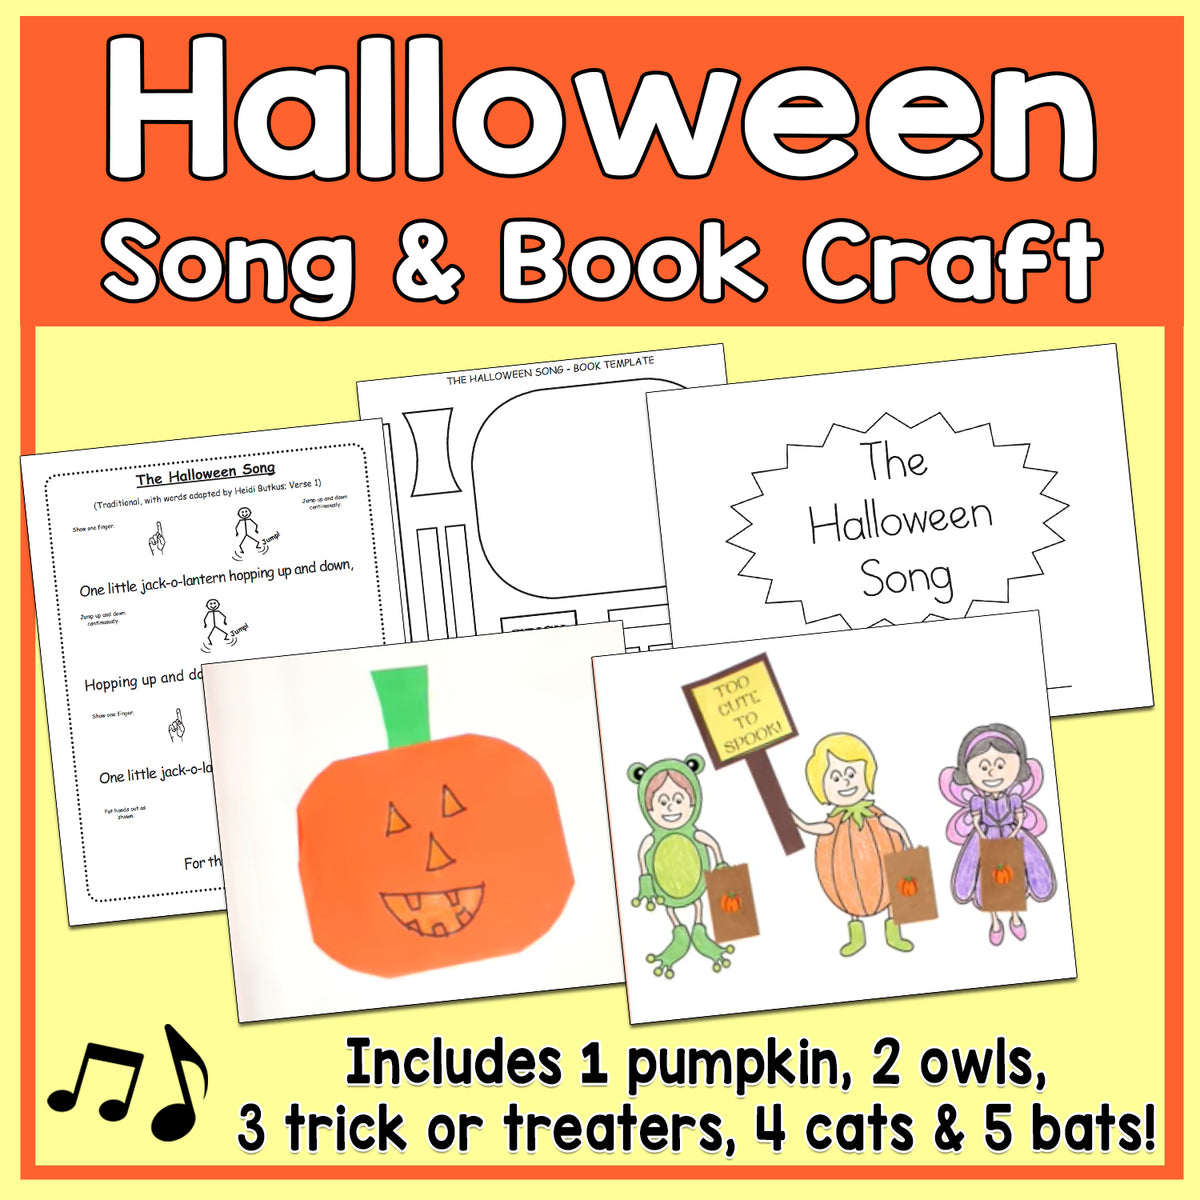 The Halloween Song & Book Craft